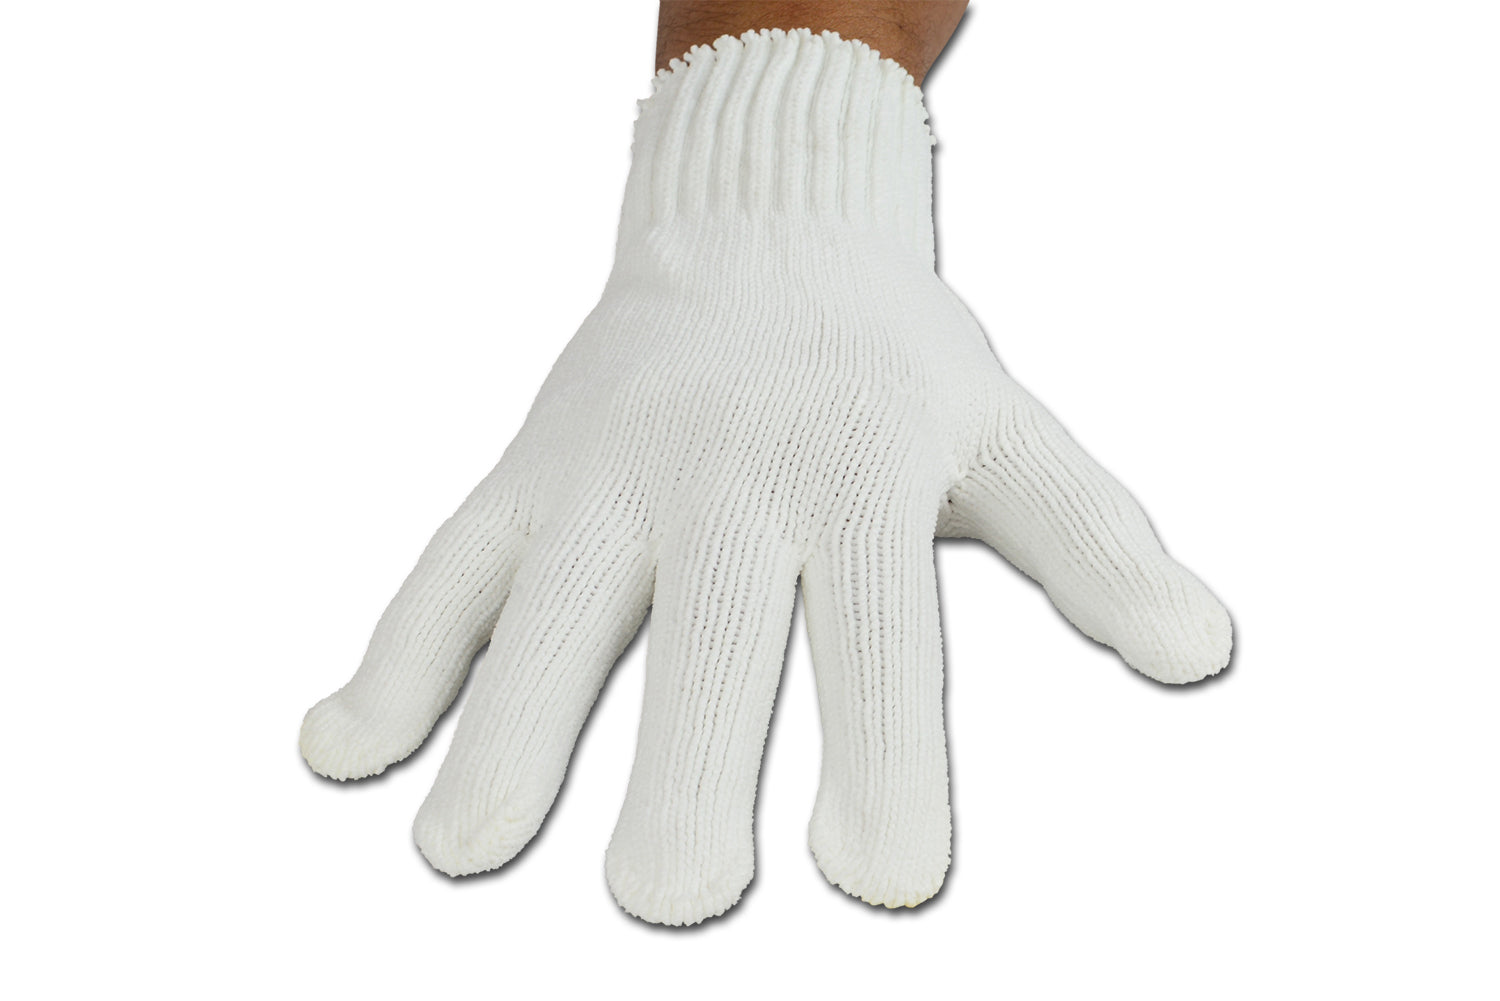 Wholesale microfiber dusting cleaning glove Of Quality Material Available 